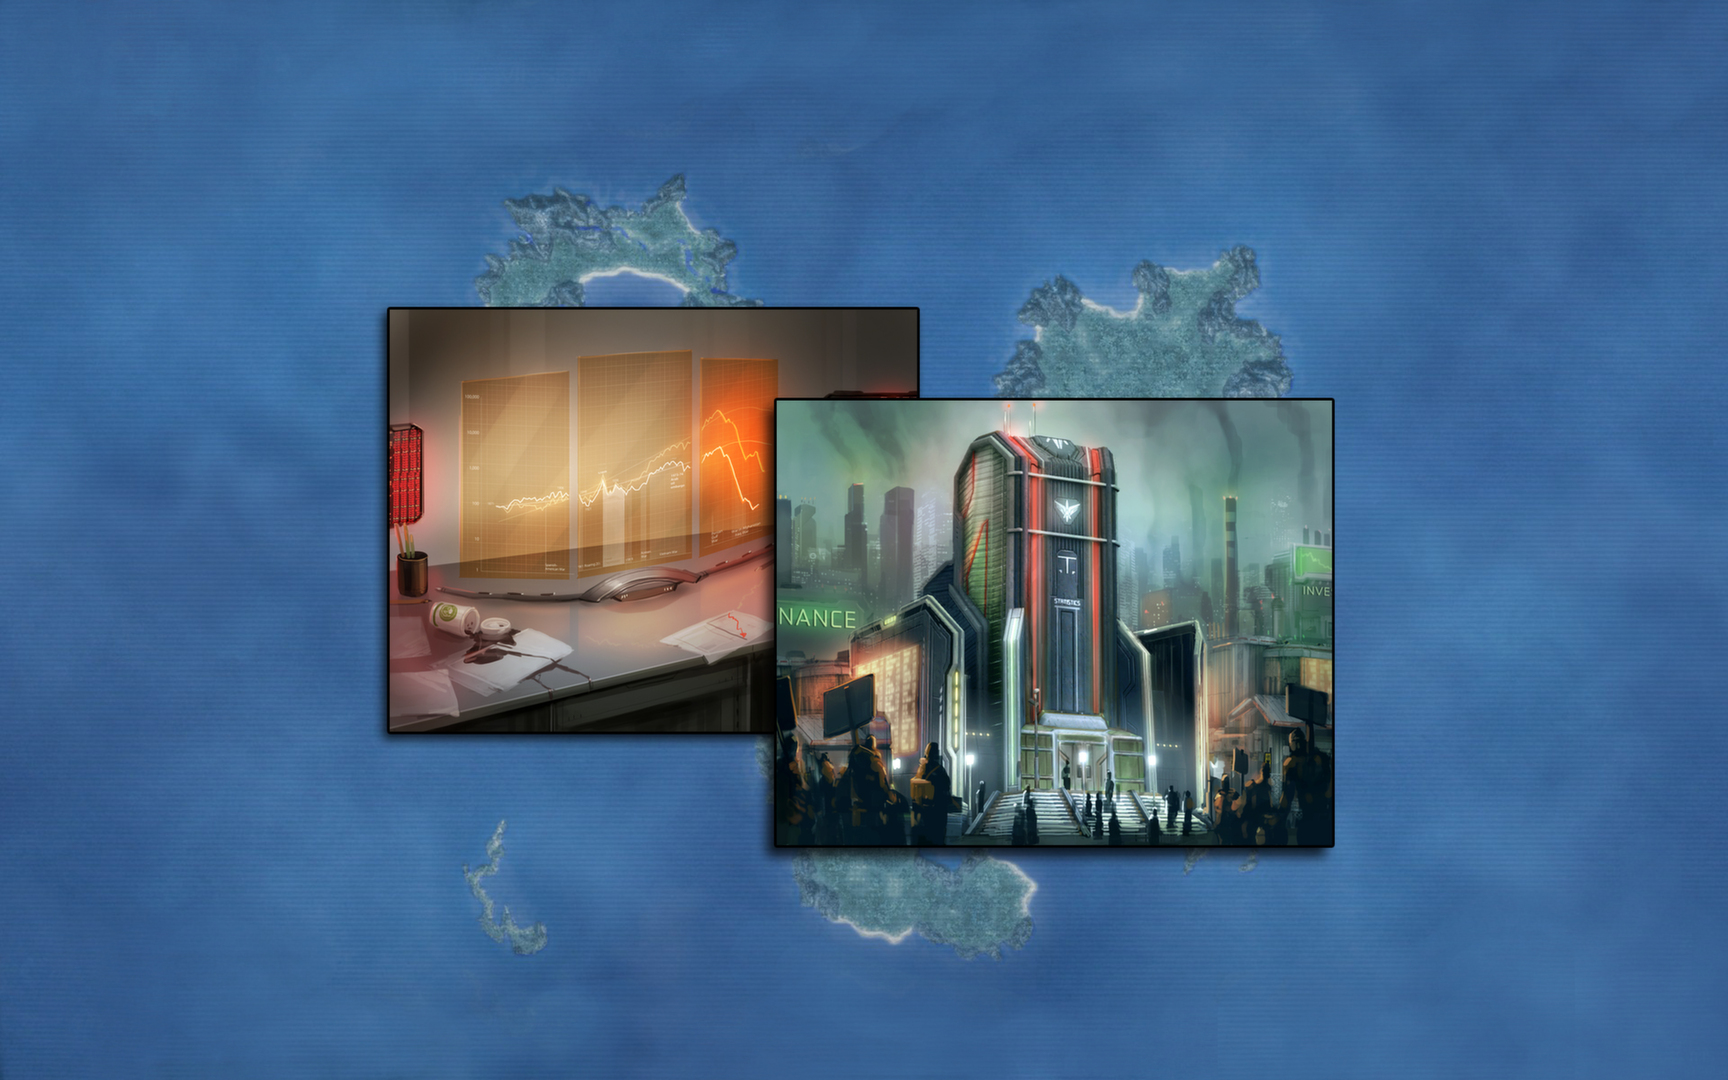 Anno 2070™ - The Crisis Response Package Featured Screenshot #1